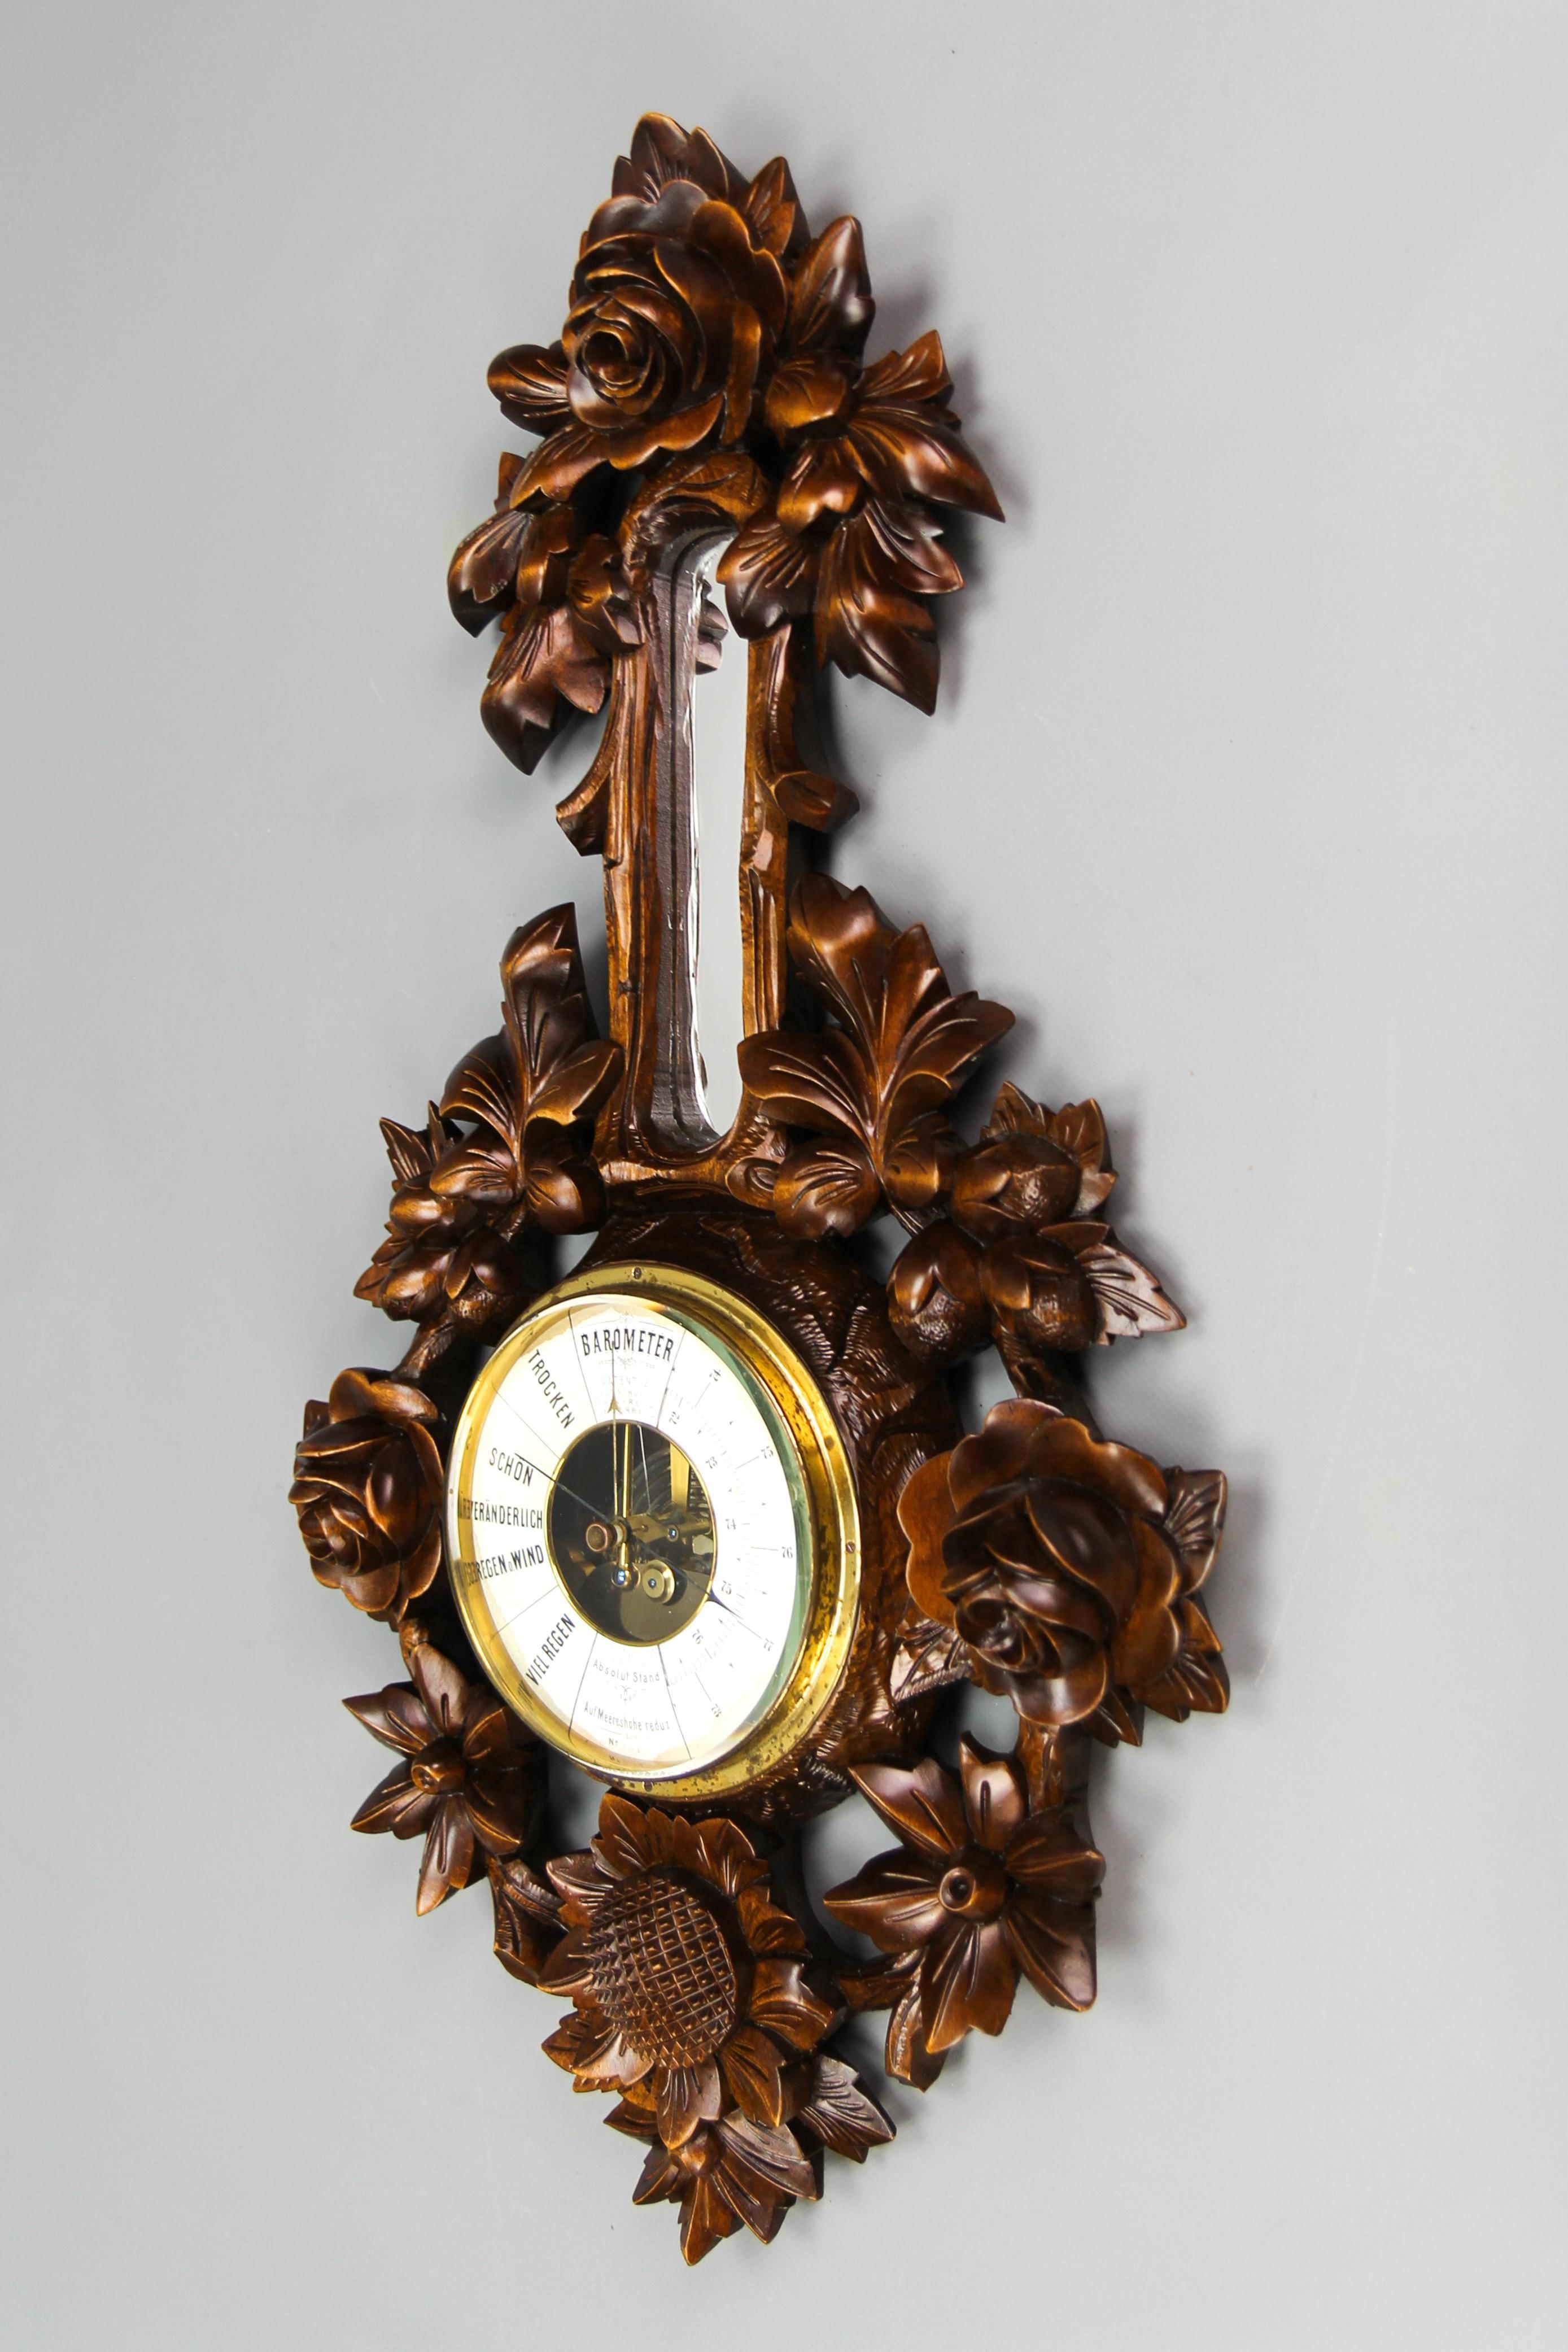 Black Forest style carved walnut barometer, Germany, ca. 1920.
An impressive carved walnut barometer with masterfully carved flowers and leaves. A small mirror on the top of the round barometer.
In good condition with slight signs of aging and